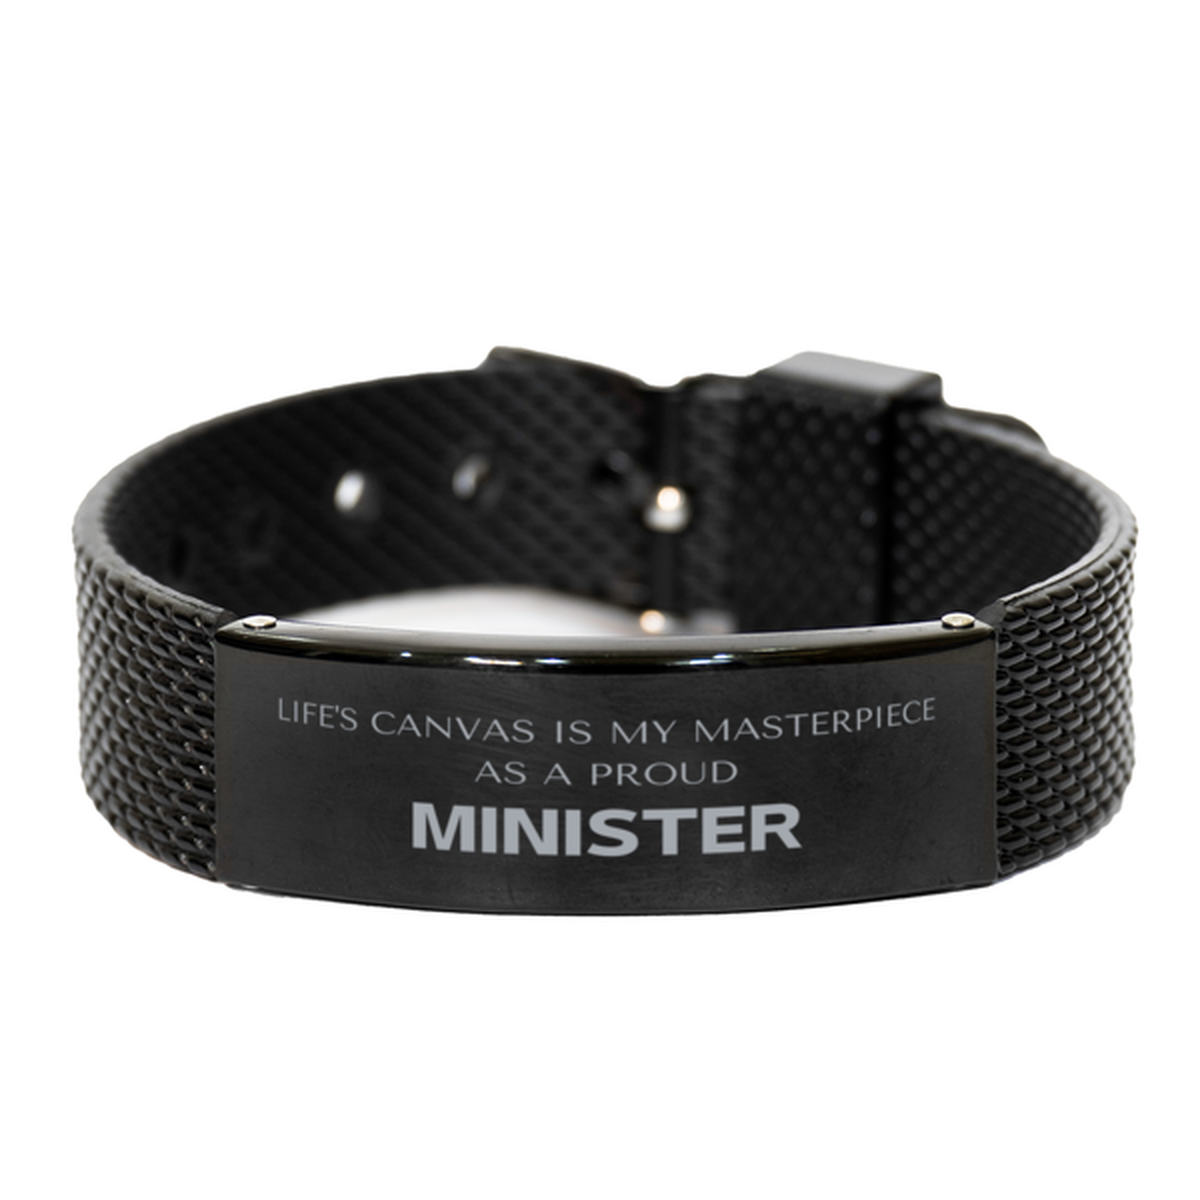 Proud Minister Gifts, Life's canvas is my masterpiece, Epic Birthday Christmas Unique Black Shark Mesh Bracelet For Minister, Coworkers, Men, Women, Friends